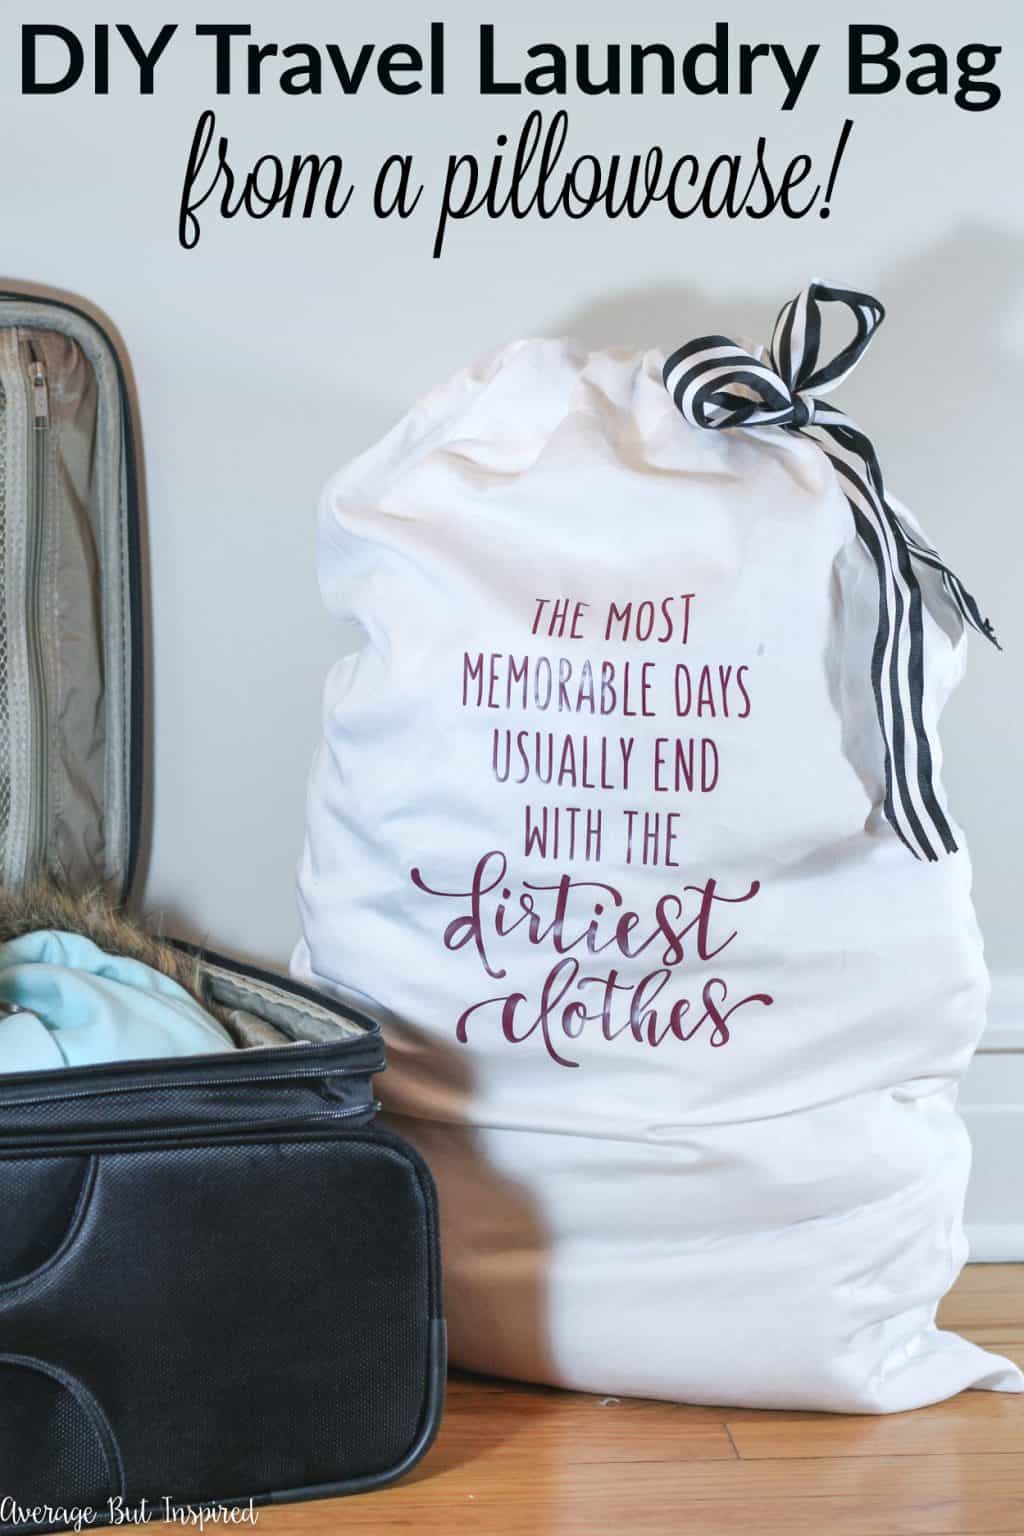 DIY Travel Laundry Bag From a Pillowcase